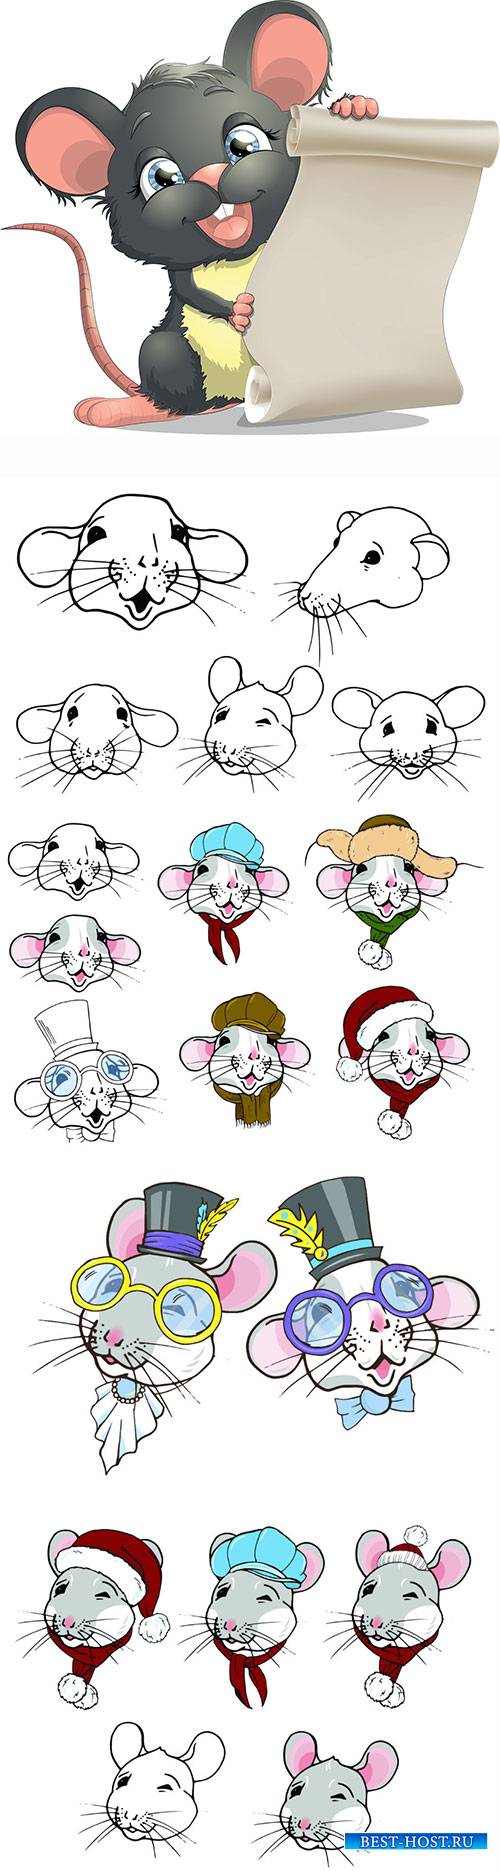 Rats, symbol of the year 2020 according to the Chinese calendar